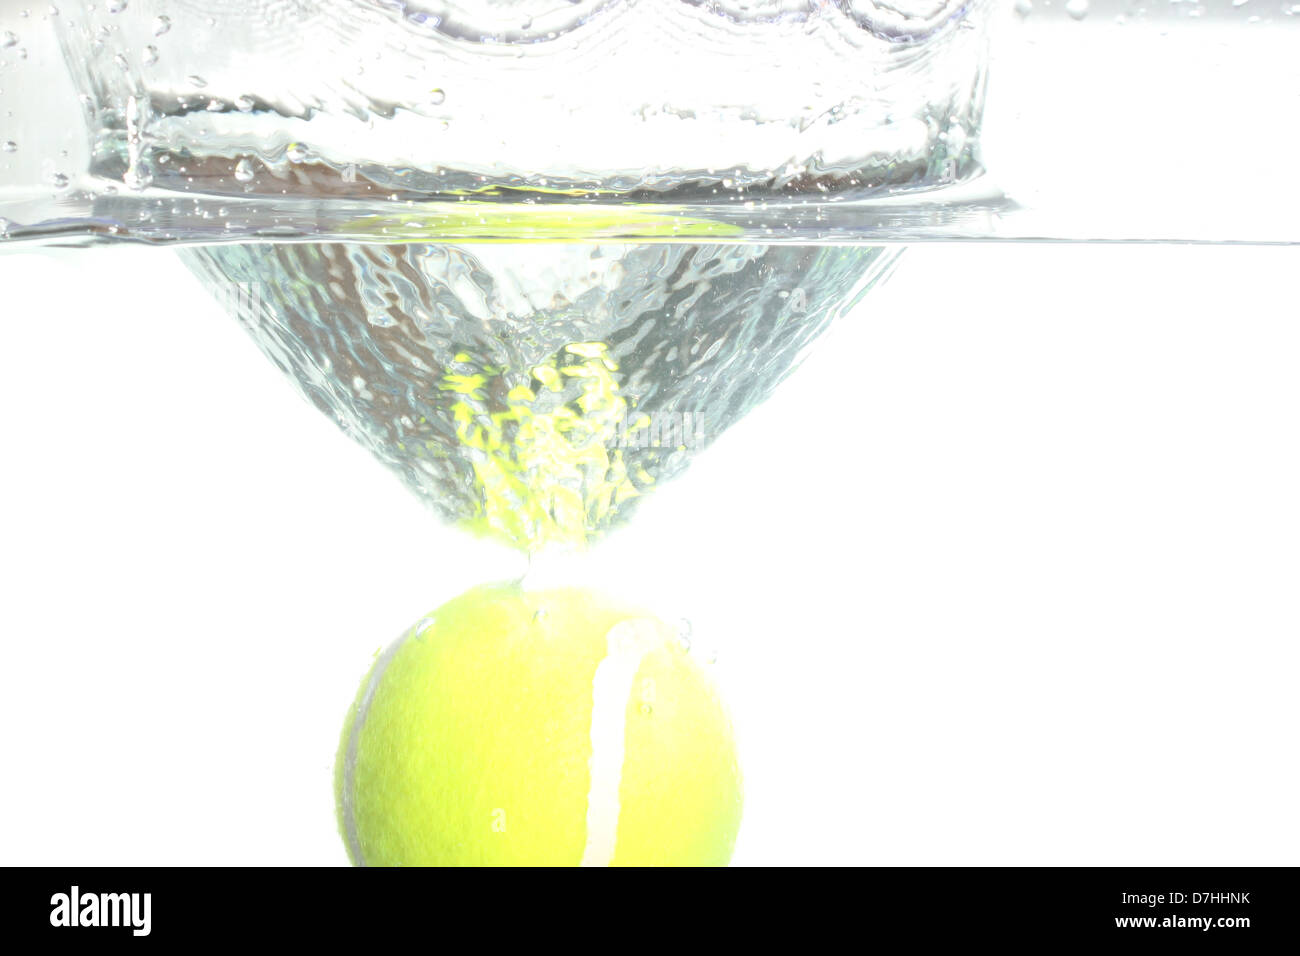 Tennis ball dropped into the water, causing spread water. Stock Photo